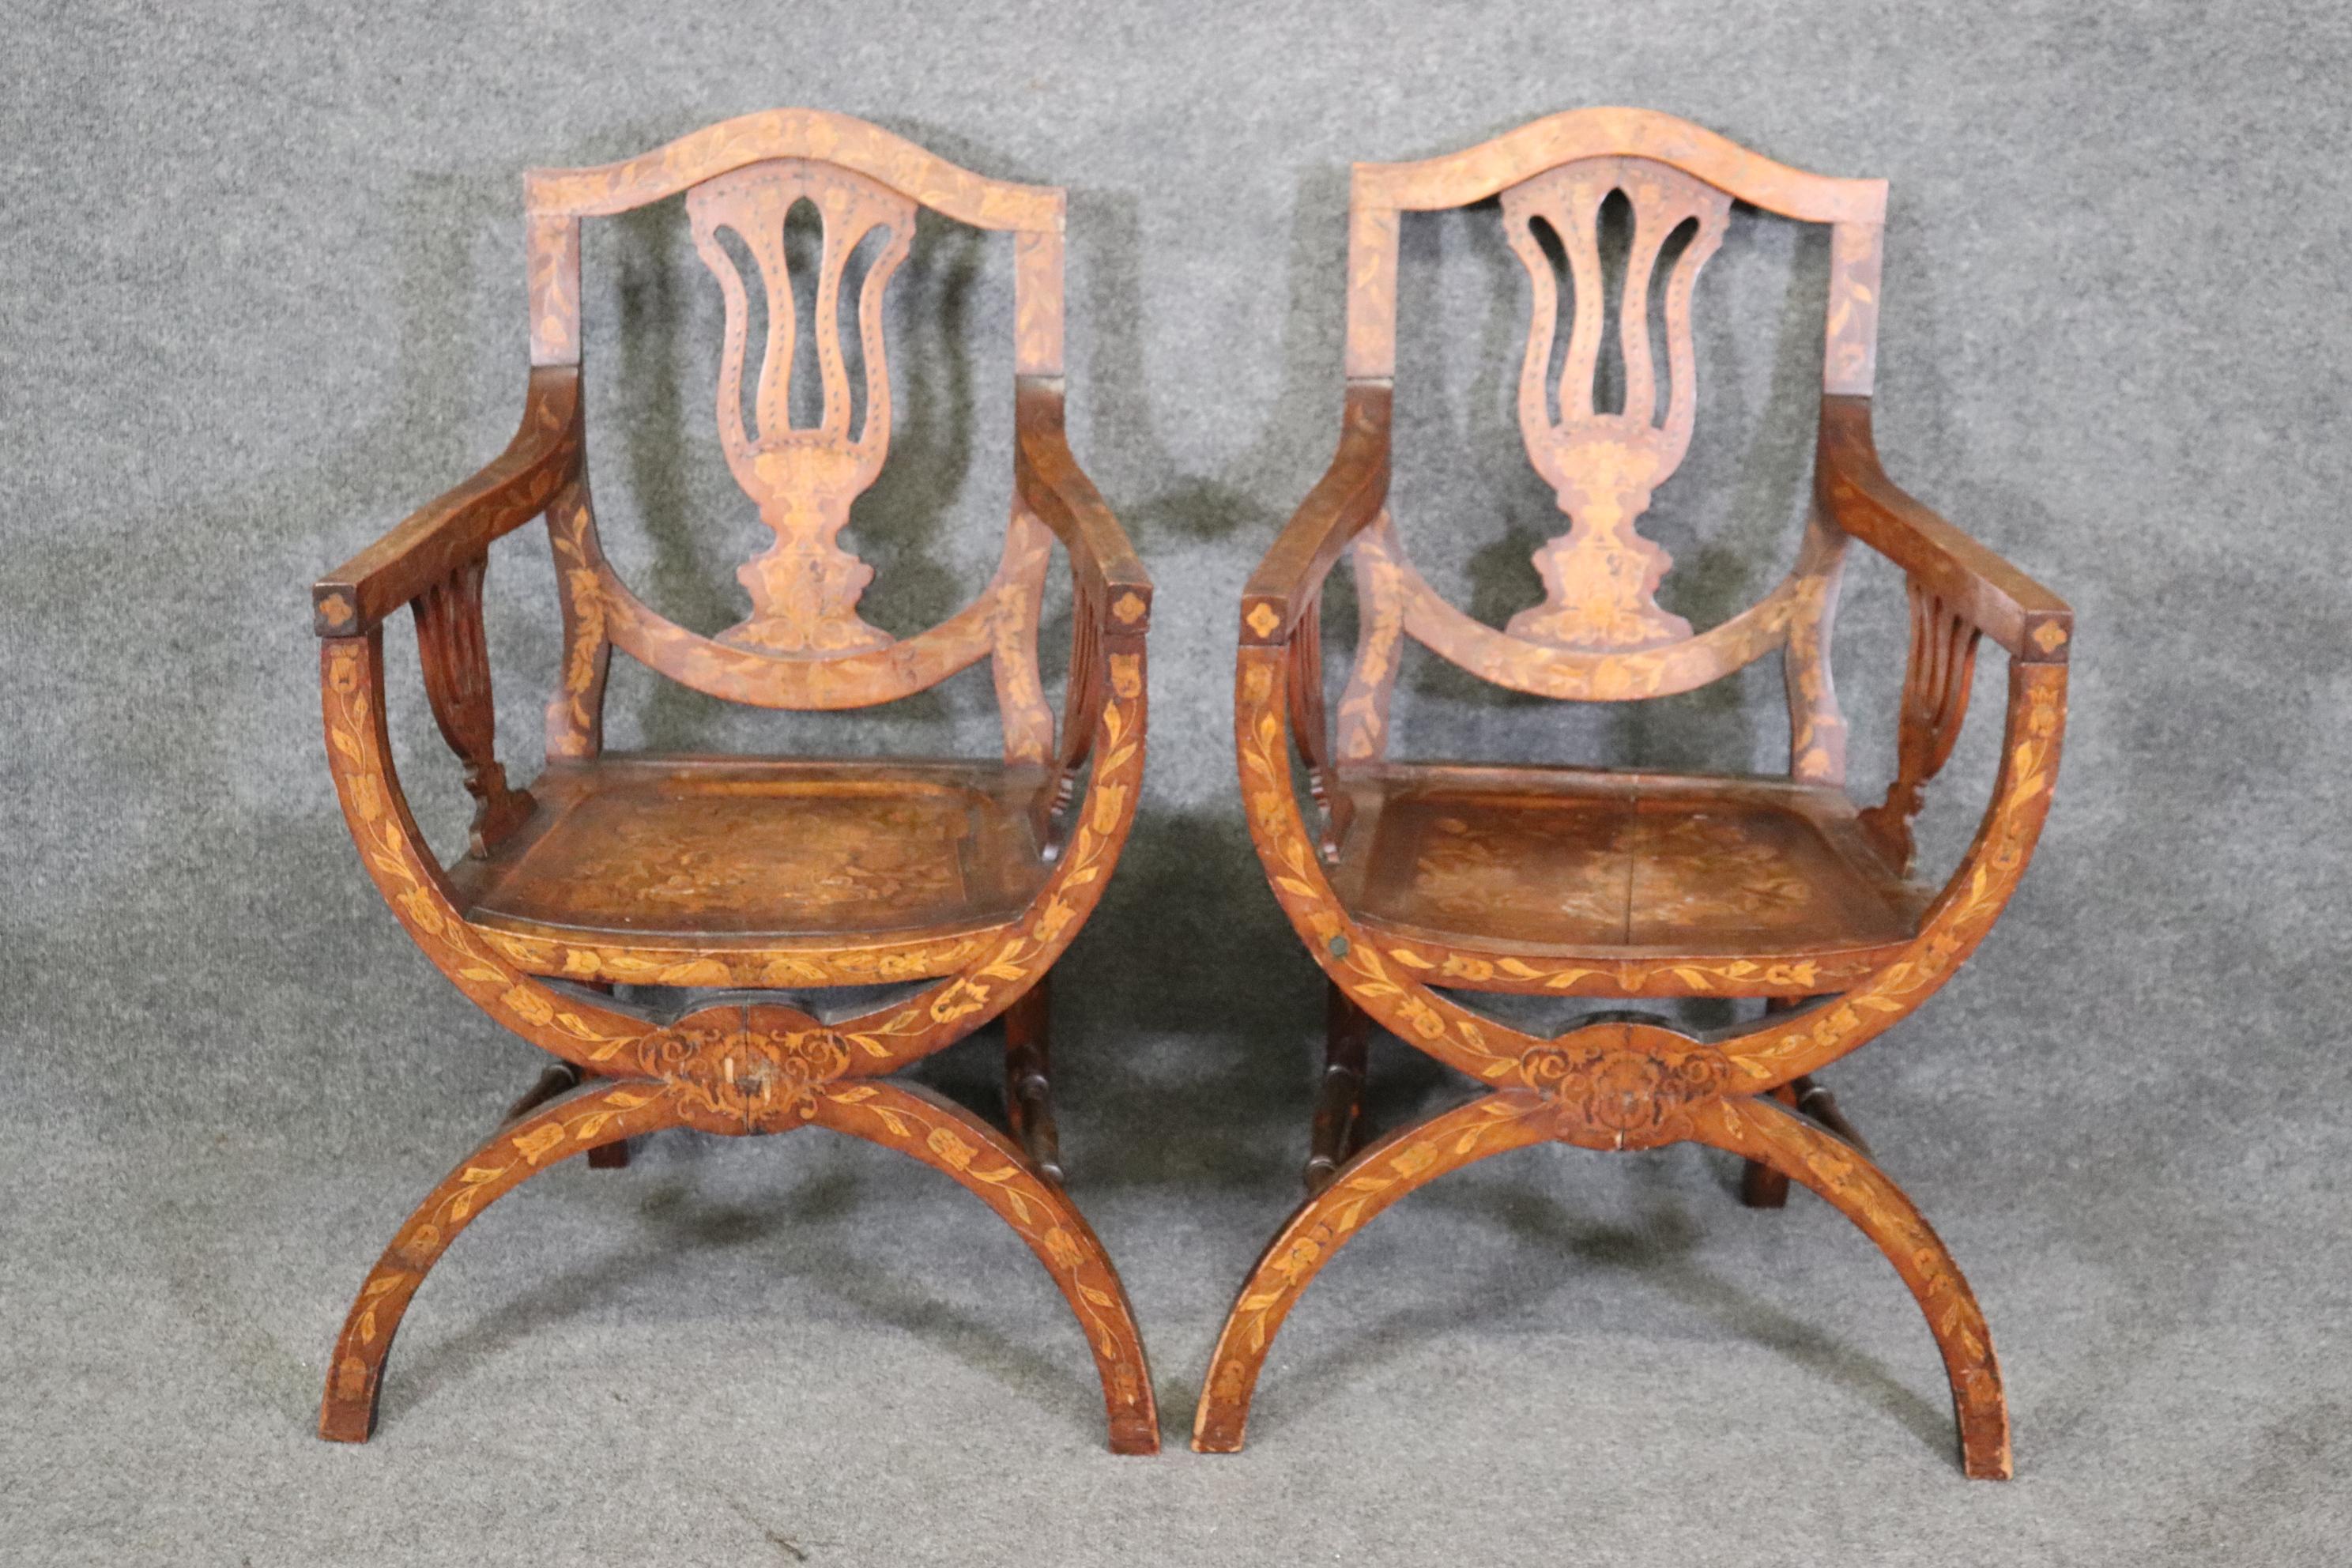 This is a wonderful pair of Danish or Belgian made 